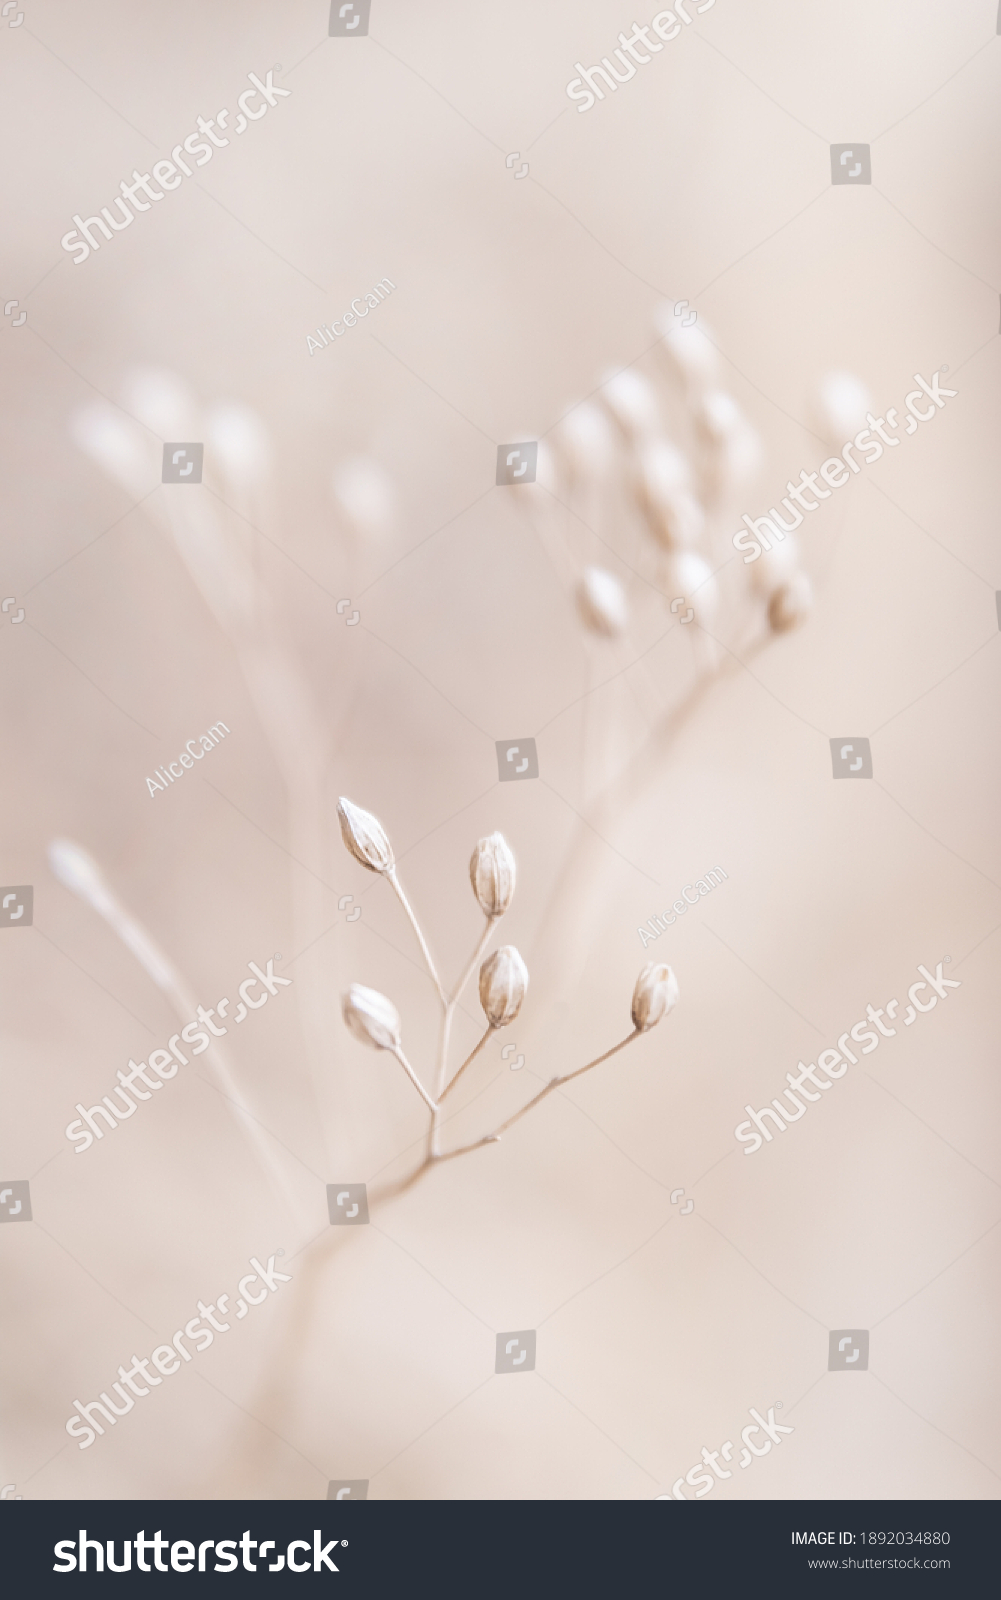 Dry flowers plant floral branch on soft beige pastel background. Blurred selective focus. Pattern with neutral natural colors. #1892034880